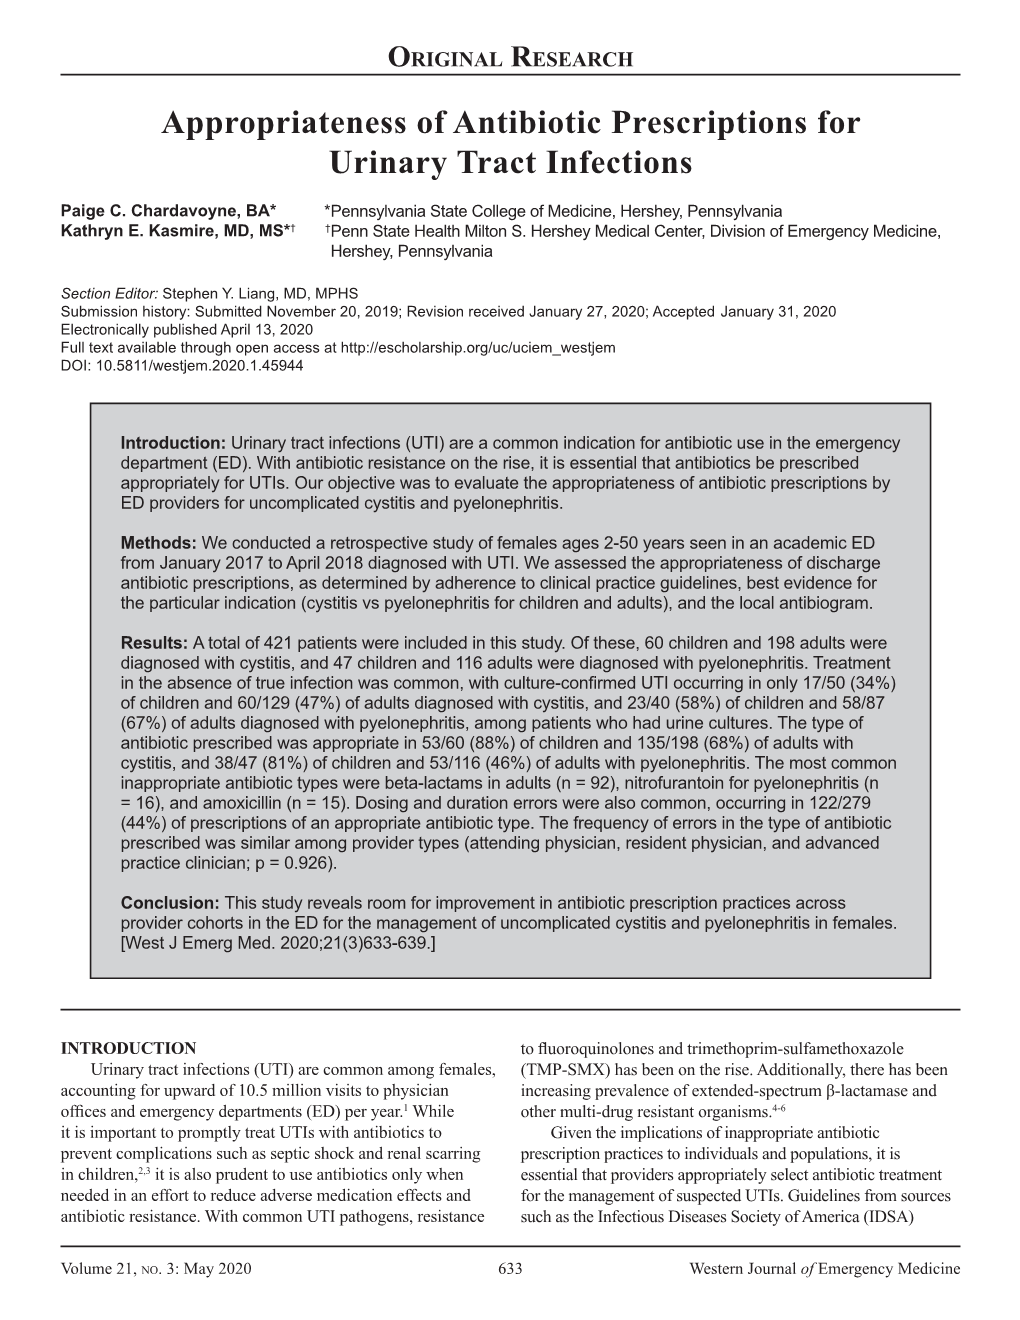 Appropriateness of Antibiotic Prescriptions for Urinary Tract Infections